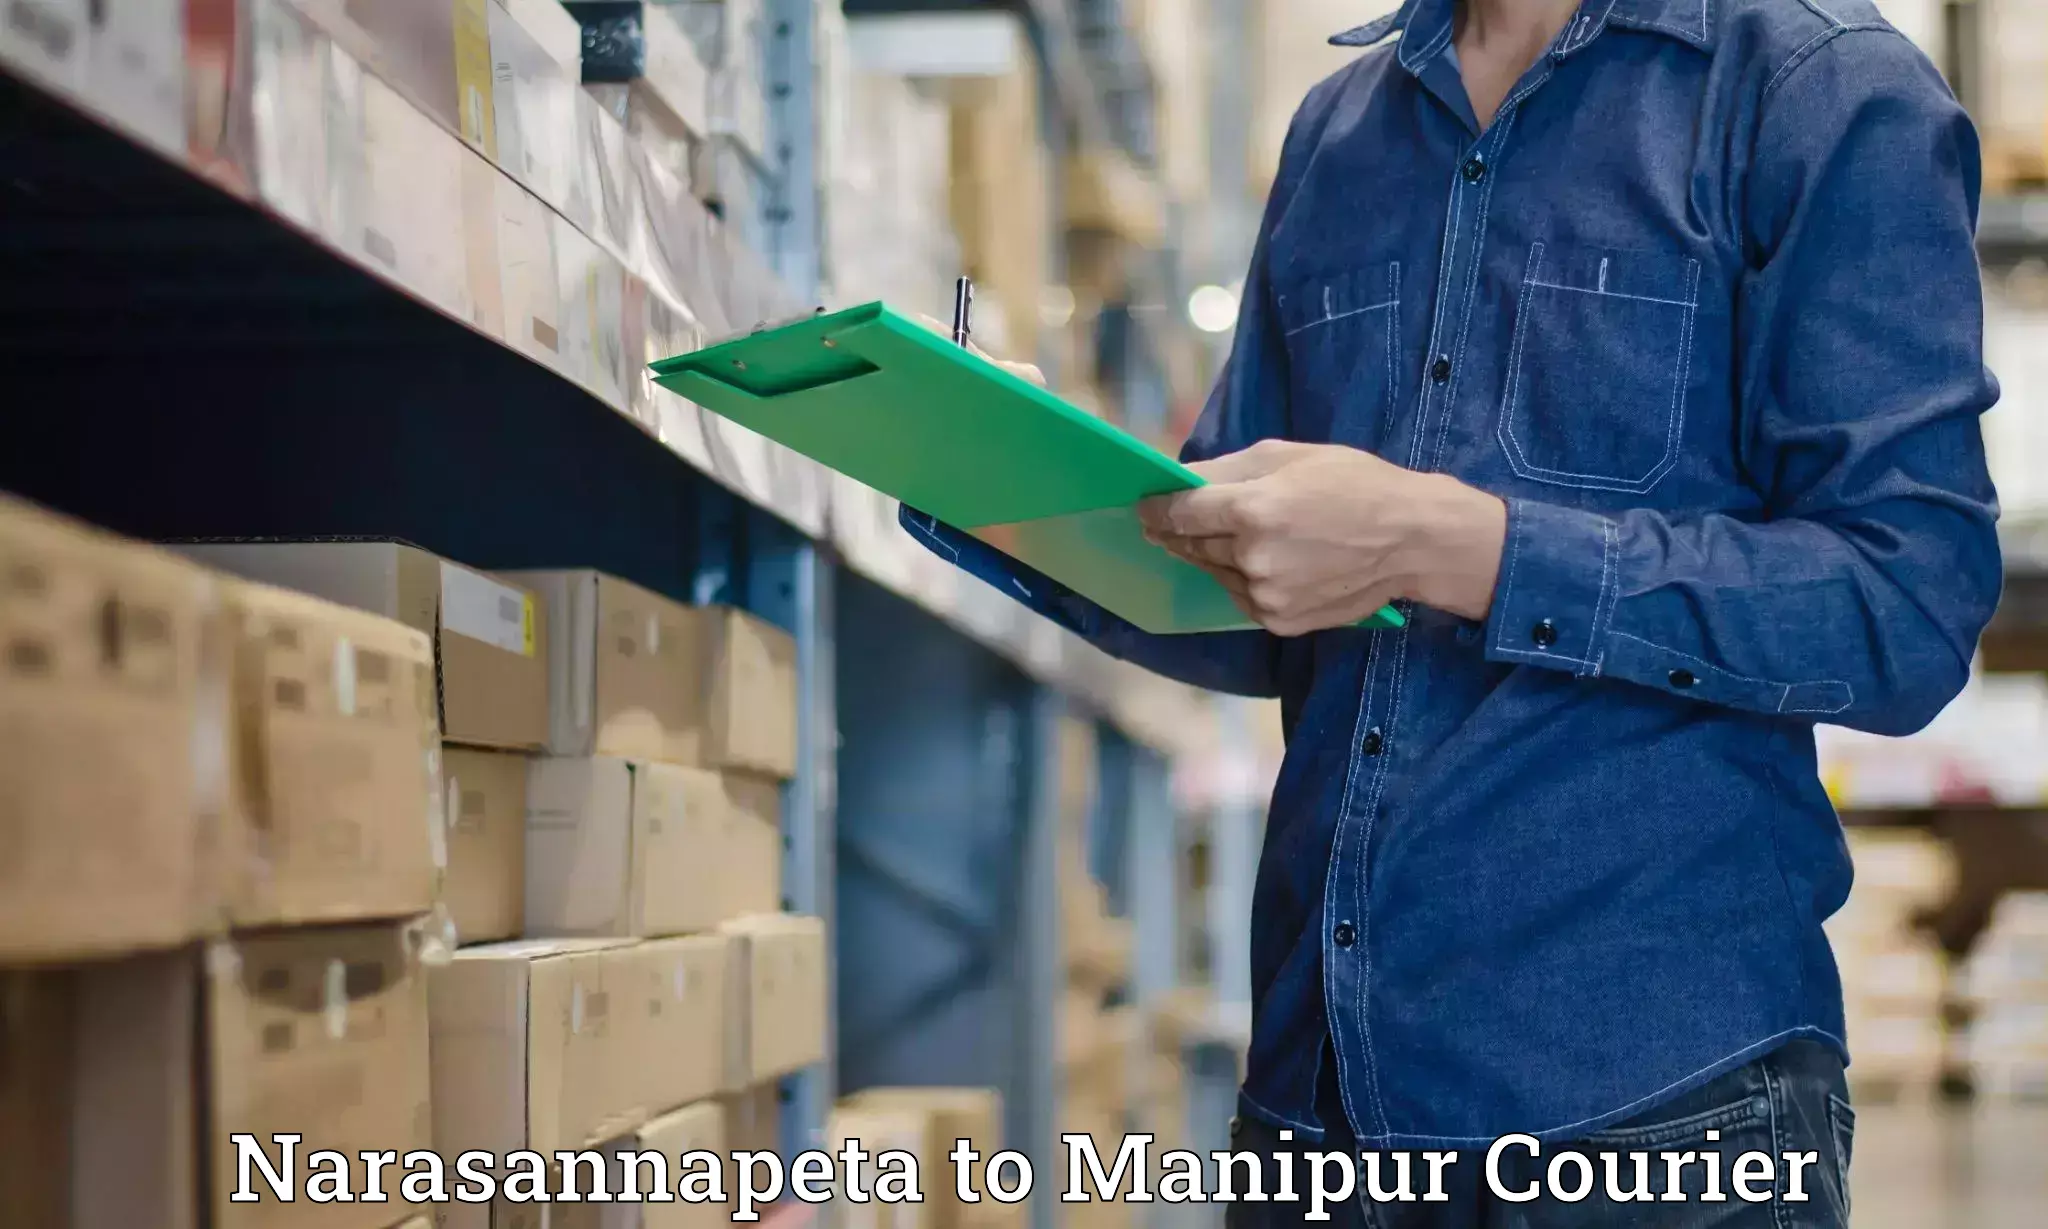 Same-day delivery solutions Narasannapeta to Chandel